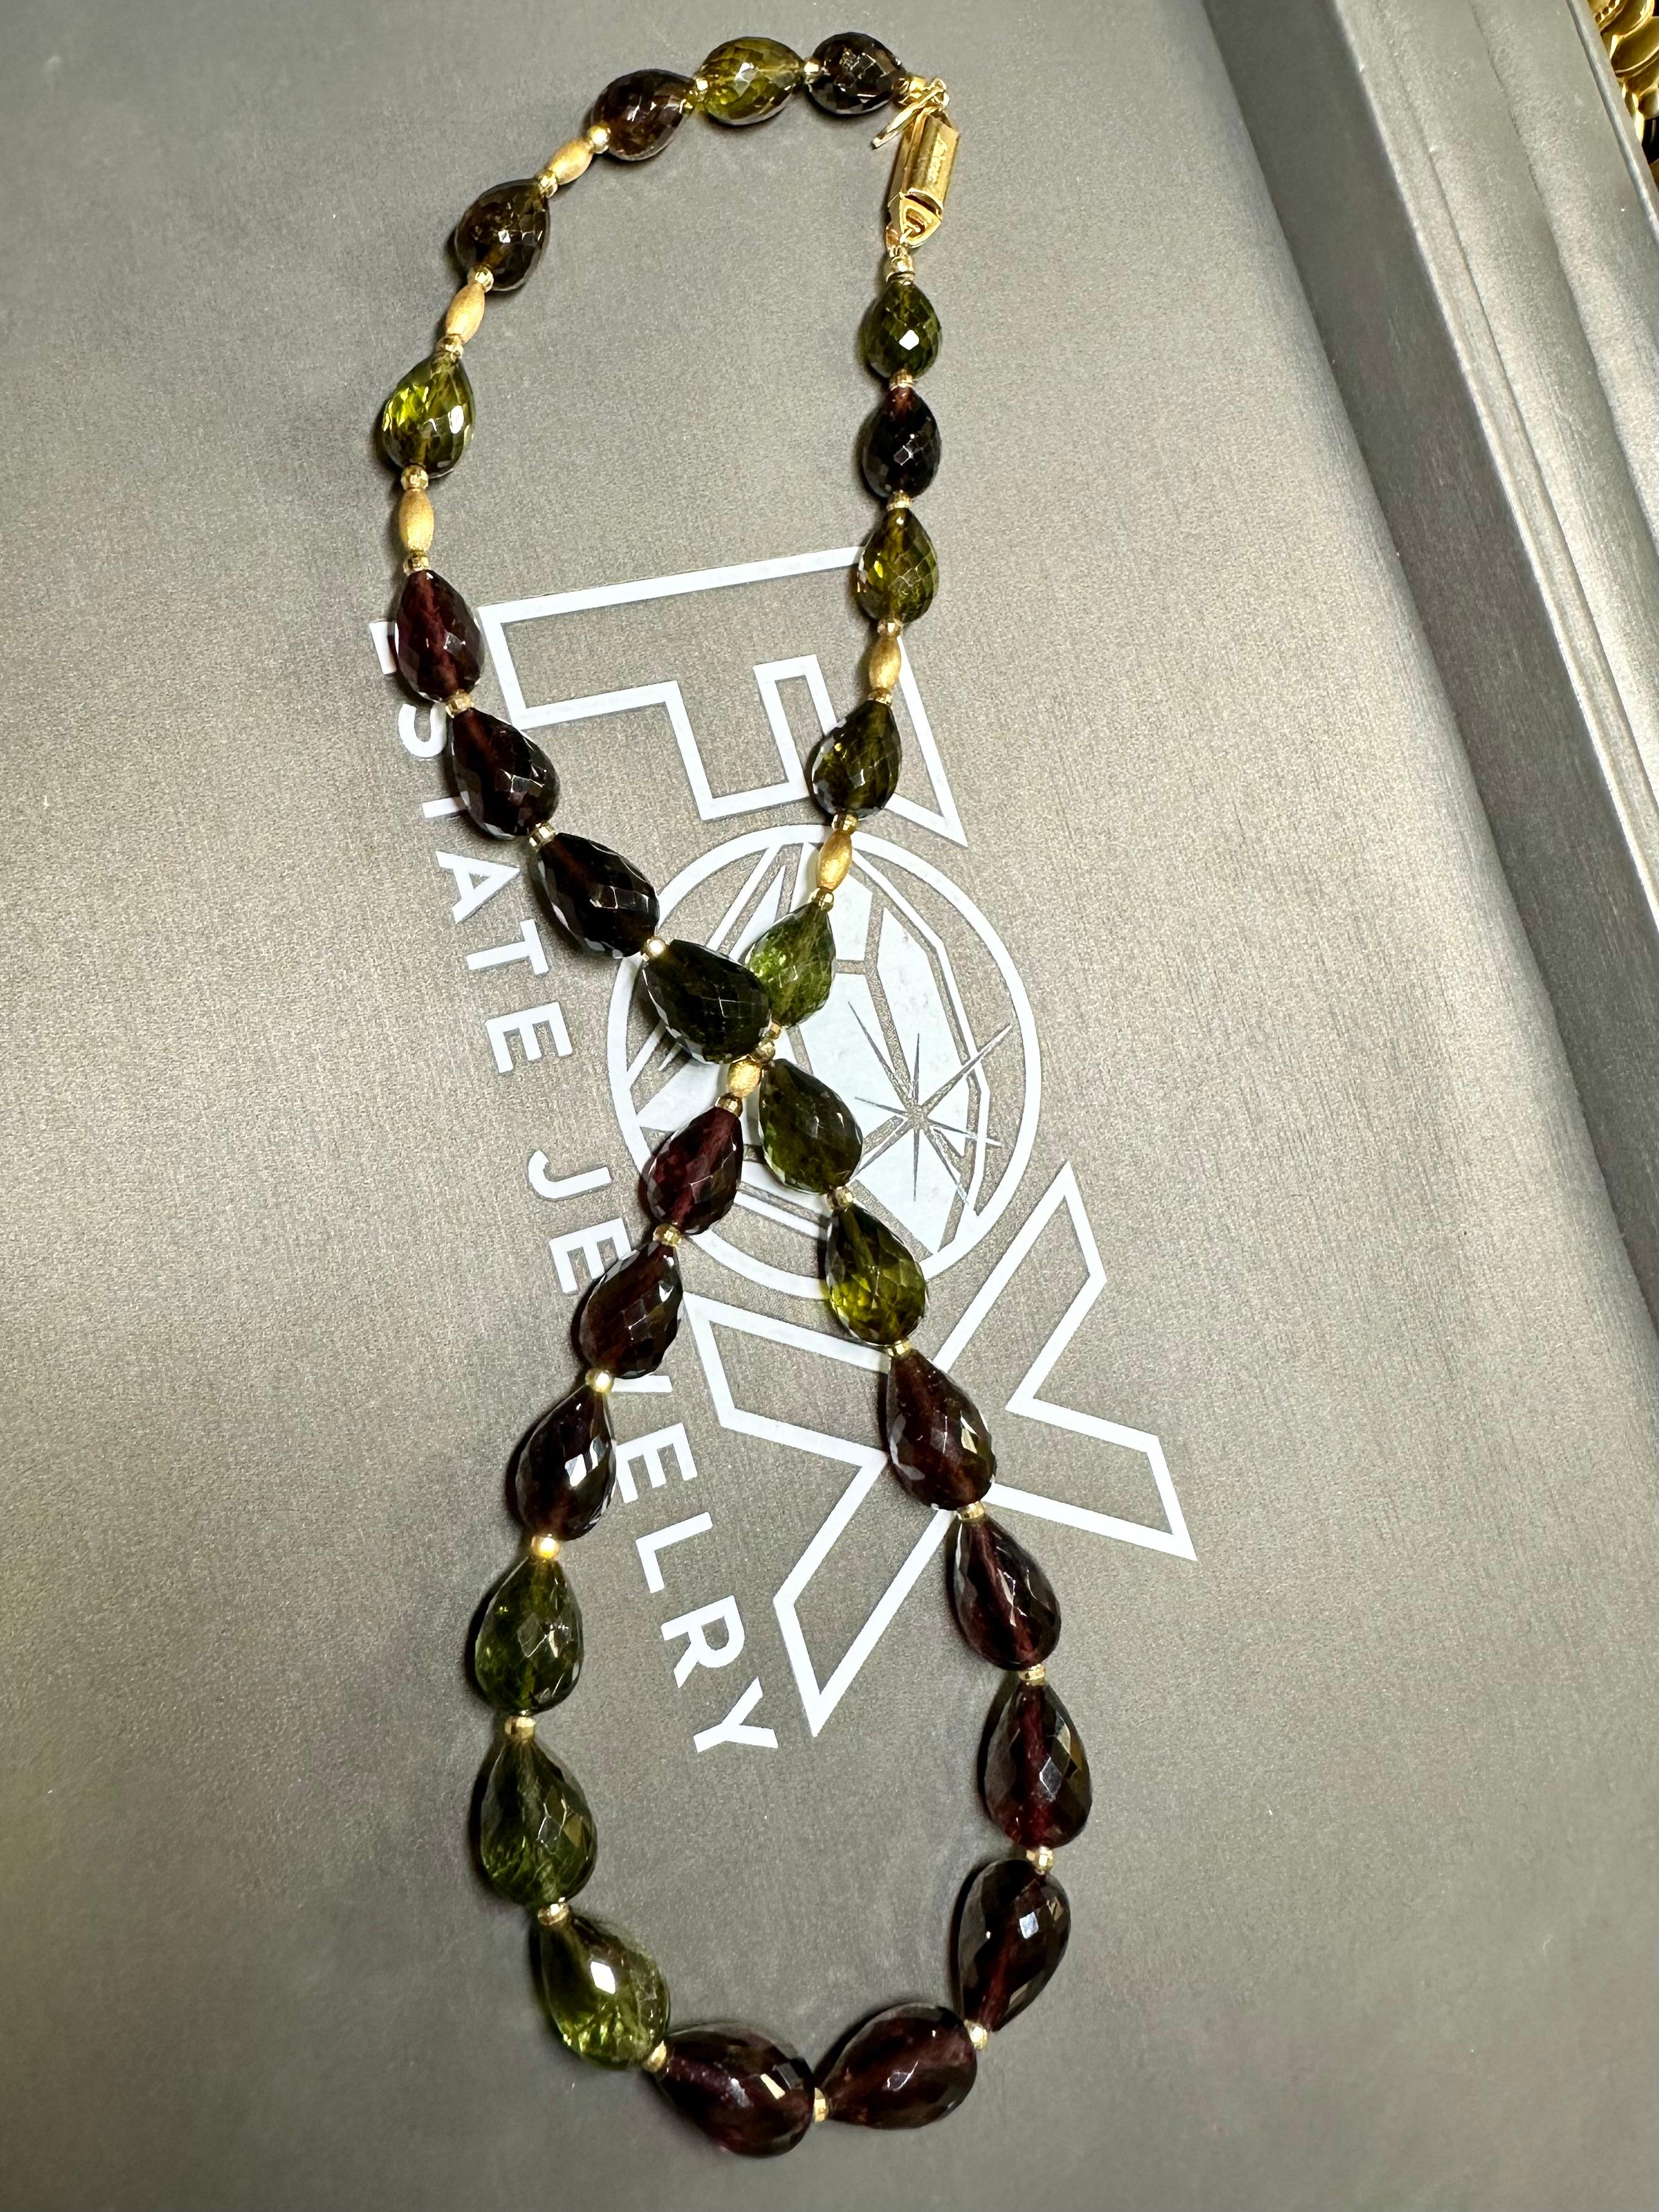 
A beautifully unique necklace done with natural briolette cut green and pink tourmaline separated by deep 18K yellow gold rondelles. There is approximately 150cttw in tourmaline strung on the gorgeous piece. Truly a unique